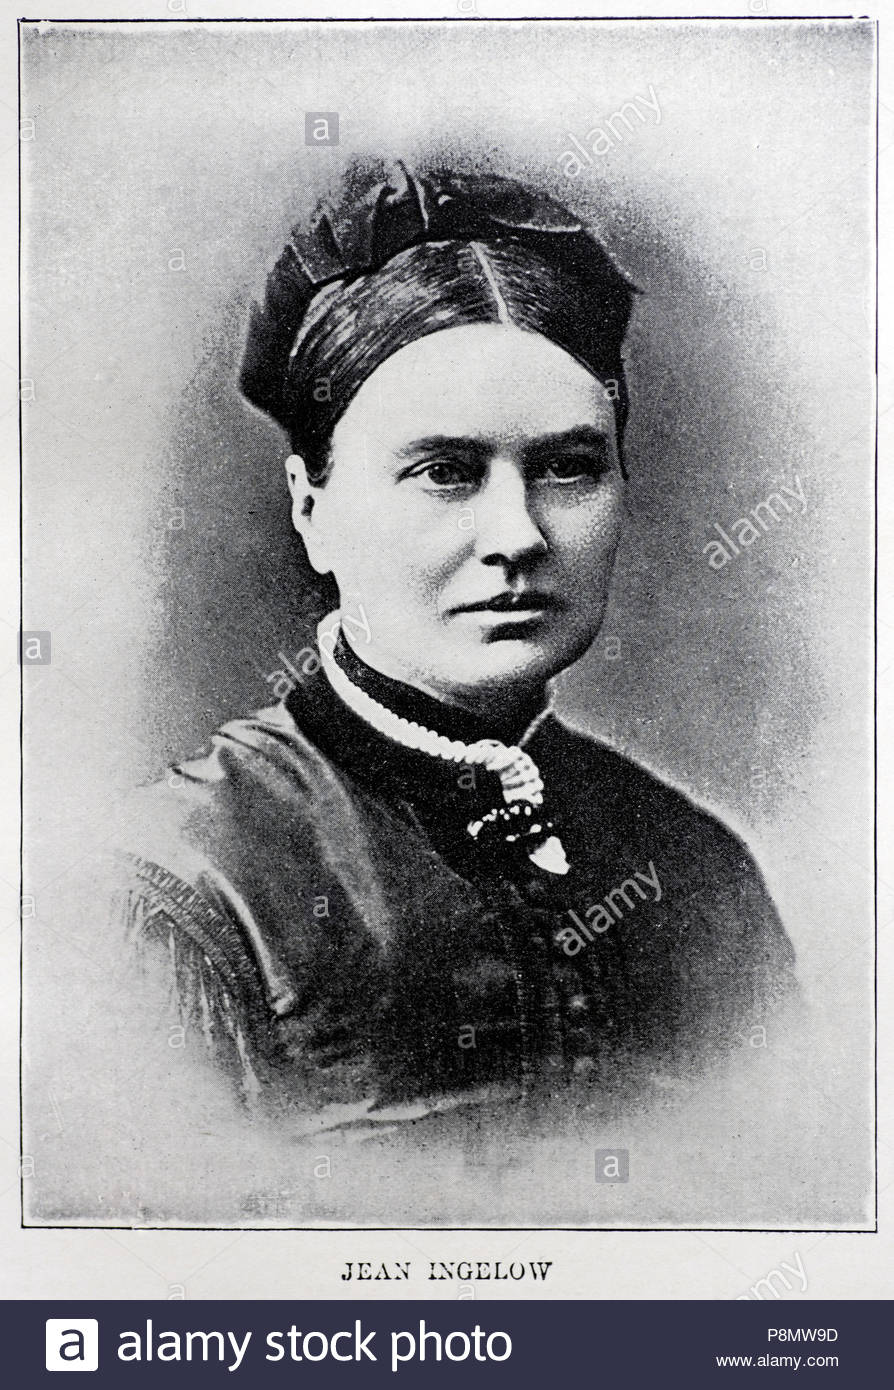 Jean Ingelow, 1820 – 1897, was an English poet and novelist, picture from late 1800s Stock Photo